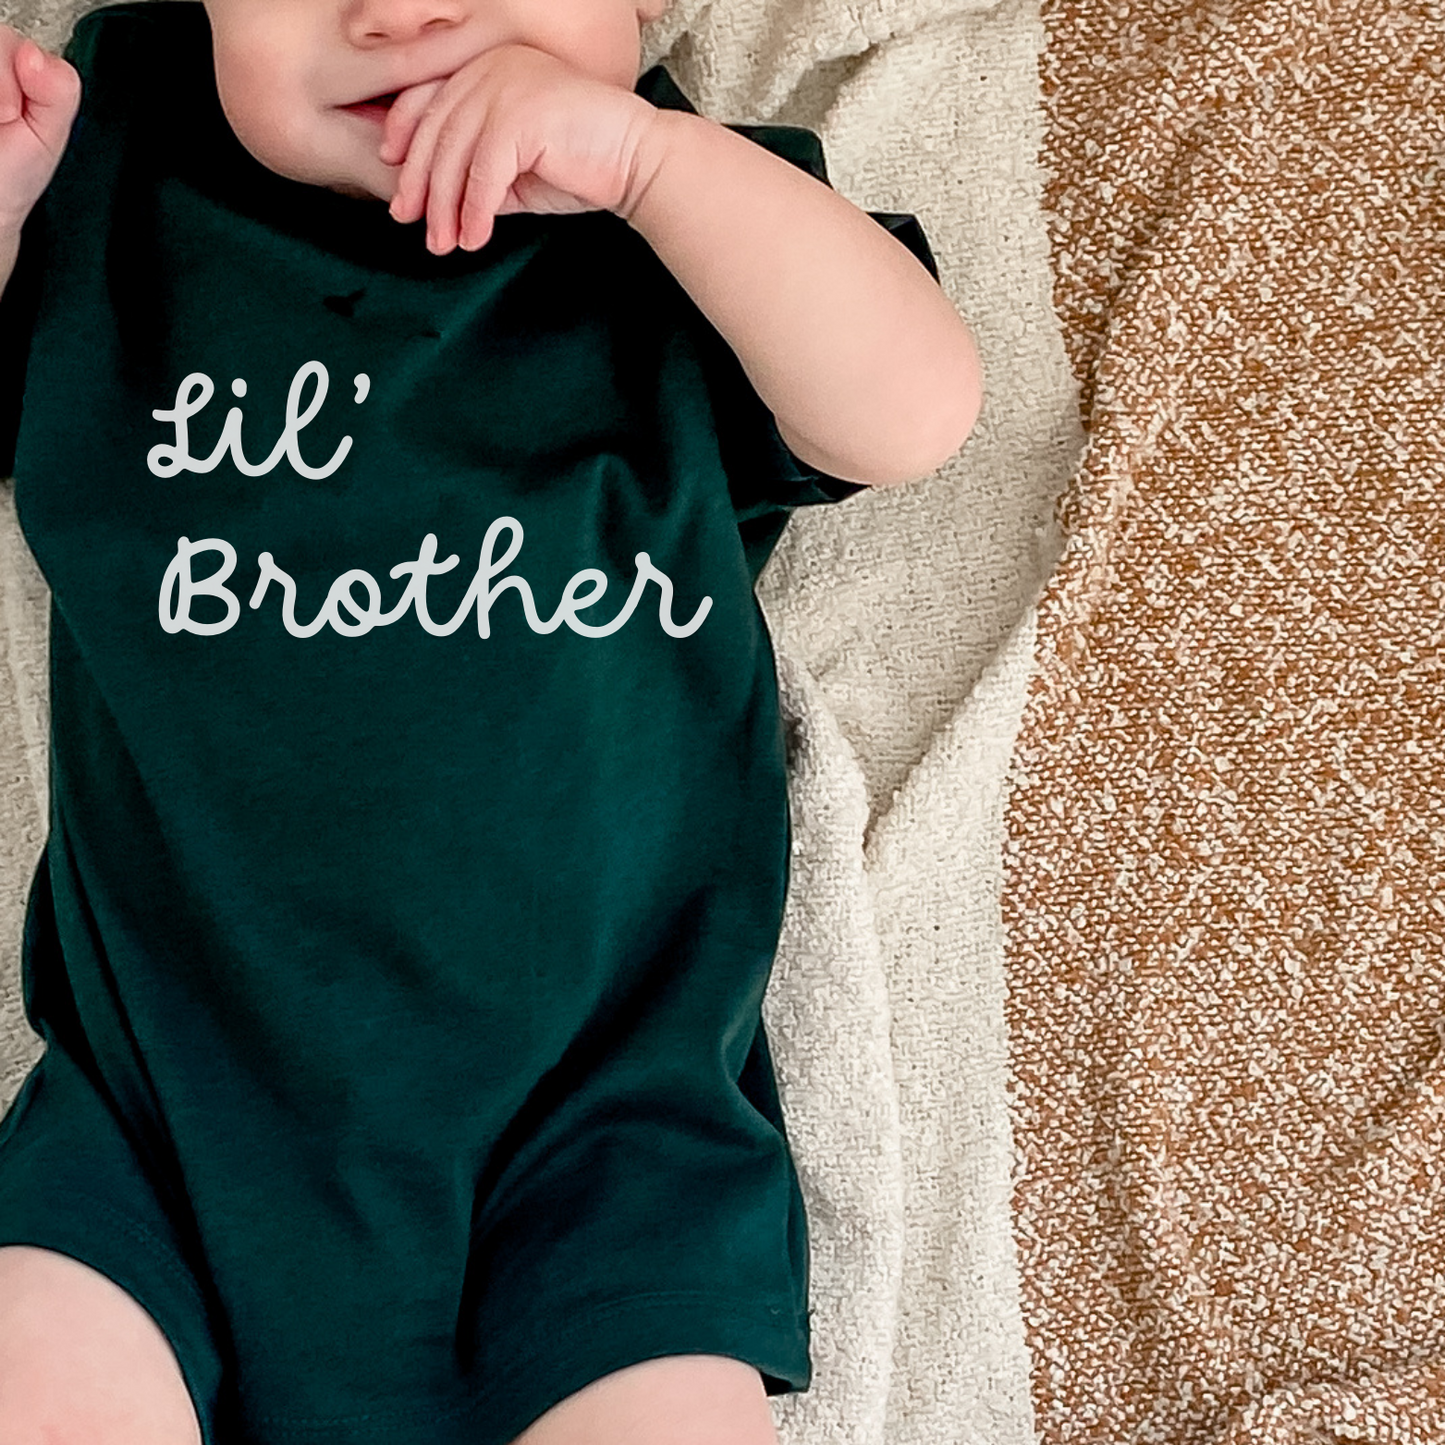 Lil' Brother (Toddler)